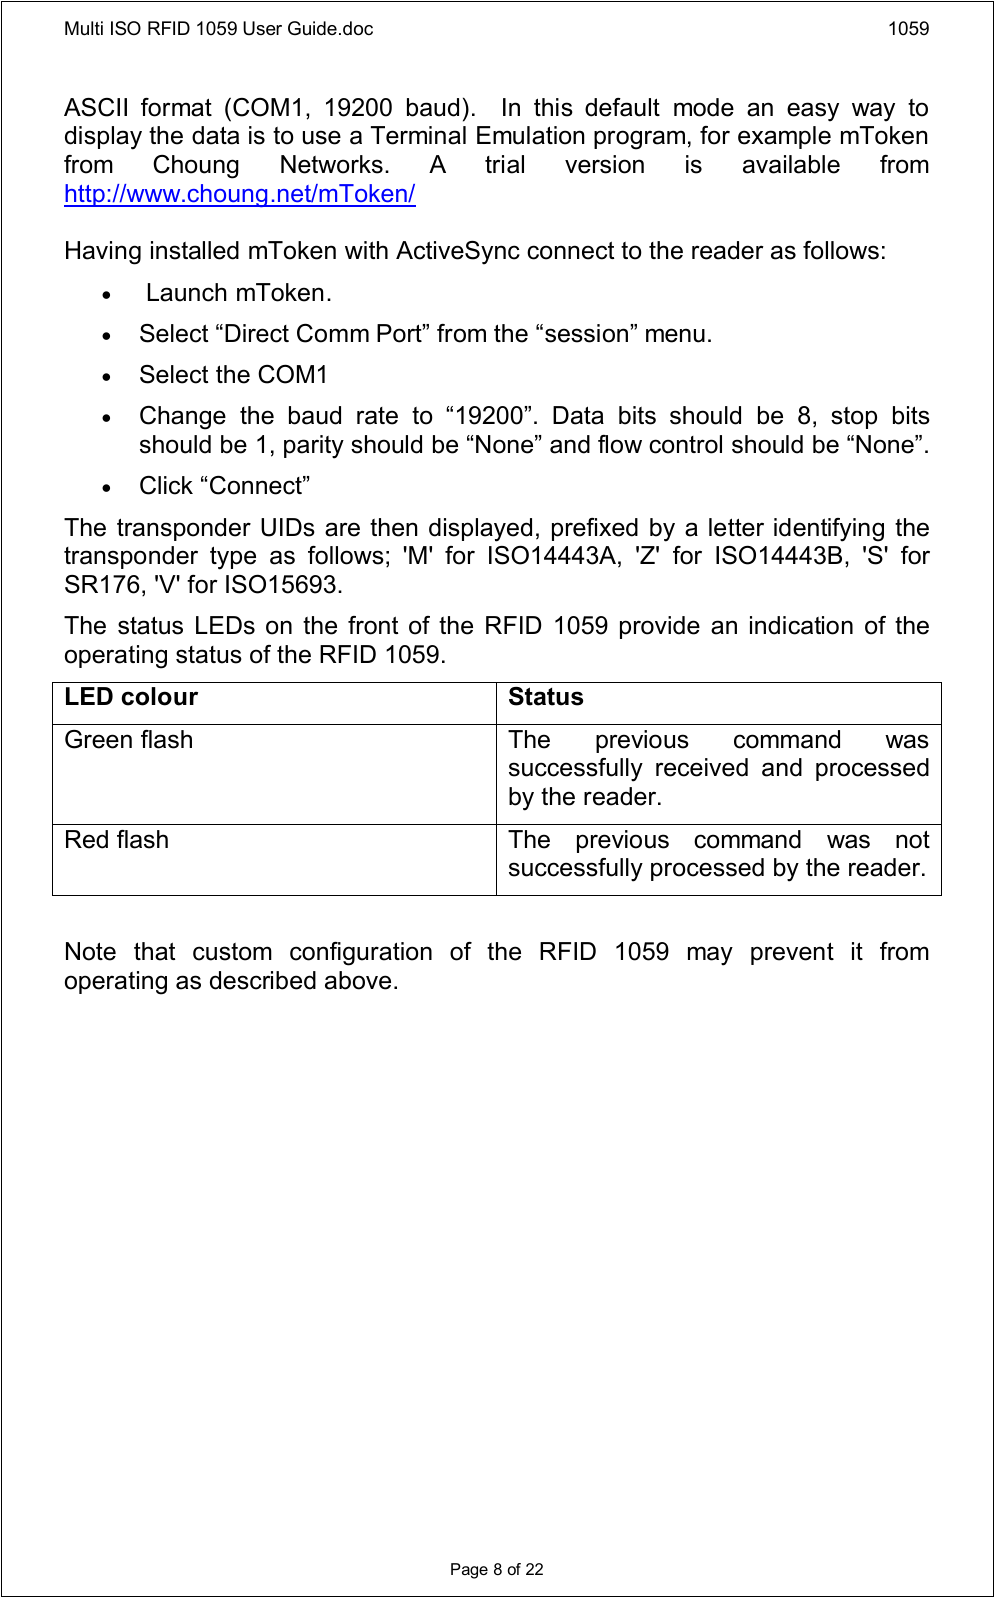 Multi ISO RFID 1059 User Guide.doc 1059Page 8 of 22ASCII  format  (COM1,  19200  baud).    In  this  default  mode  an  easy  way  to display the data is to use a Terminal Emulation program, for example mToken from  Choung  Networks.  A  trial  version  is  available  from http://www.choung.net/mToken/Having installed mToken with ActiveSync connect to the reader as follows: Launch mToken.  Select “Direct Comm Port” from the “session” menu.  Select the COM1  Change  the  baud  rate  to  “19200”.  Data  bits  should  be  8,  stop  bits should be 1, parity should be “None” and flow control should be “None”.  Click “Connect”The transponder UIDs are then displayed, prefixed by a letter identifying the transponder  type  as  follows;  &apos;M&apos;  for  ISO14443A,  &apos;Z&apos;  for  ISO14443B,  &apos;S&apos;  for SR176, &apos;V&apos; for ISO15693.The status LEDs on the  front of  the RFID 1059 provide  an indication of the operating status of the RFID 1059.LED colour StatusGreen flash The  previous  command  was successfully  received  and  processed by the reader.Red flash The  previous  command  was  not successfully processed by the reader.Note  that  custom  configuration  of  the  RFID  1059  may  prevent  it  from operating as described above.